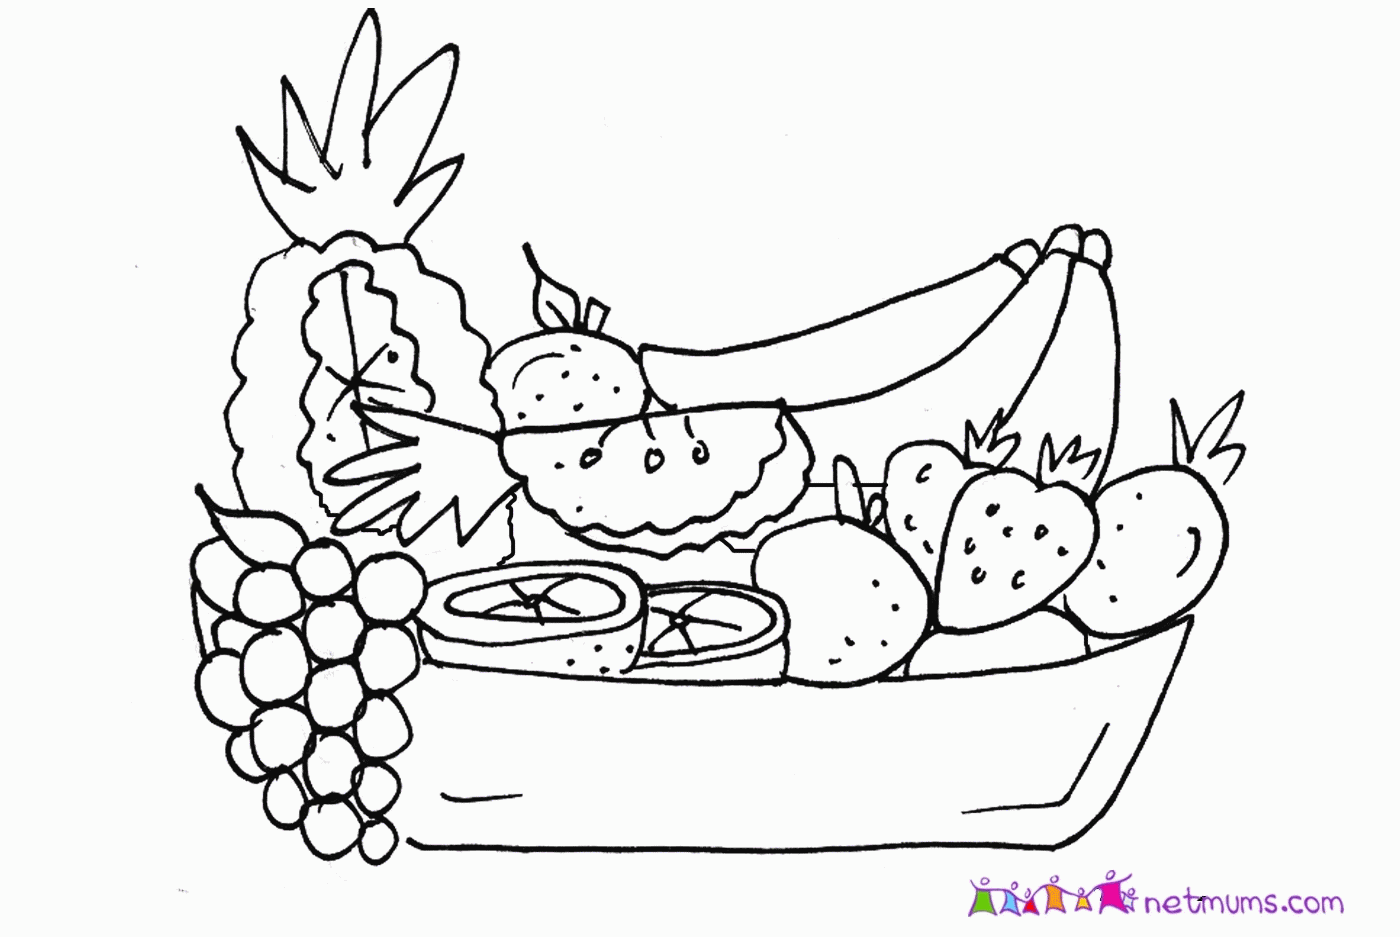 Coloring Page Of Fruit Bowl - Coloring Page Photos